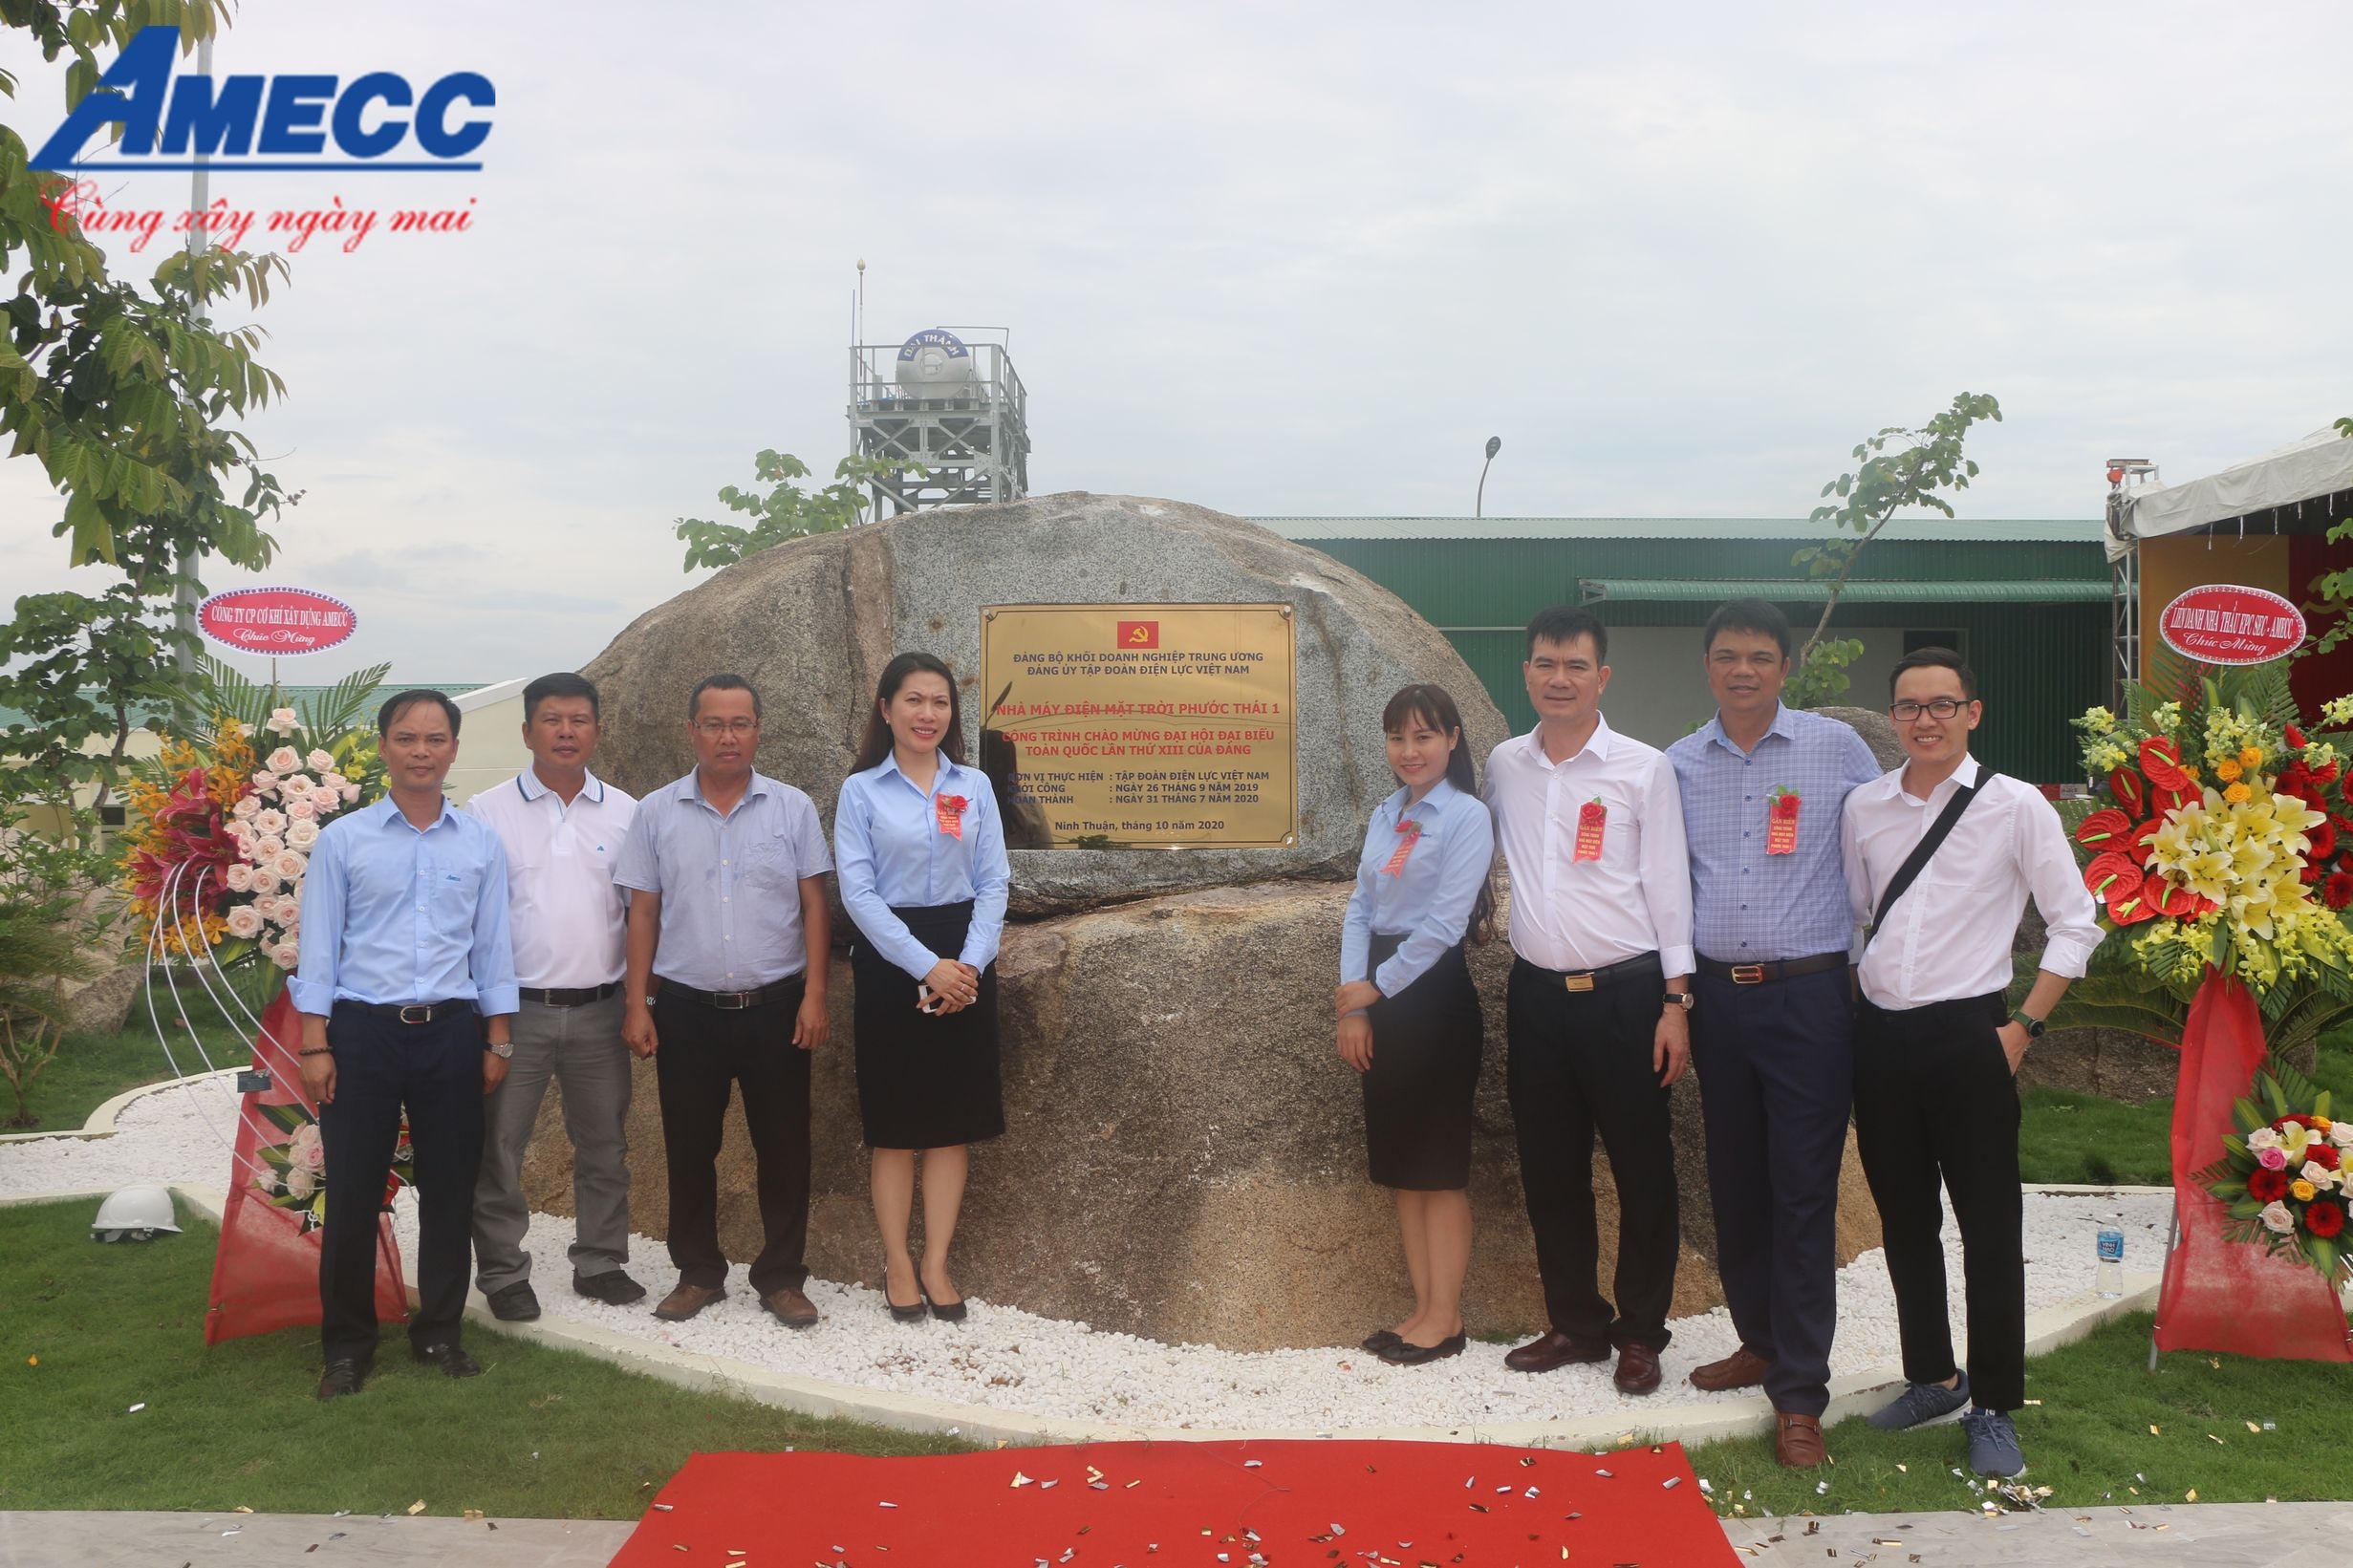 AMECC - PARTICIPATING IN THE PROJECT NAME ATTACHMENT CEREMONY OF PHUOC THAI 1 POWER PLANT